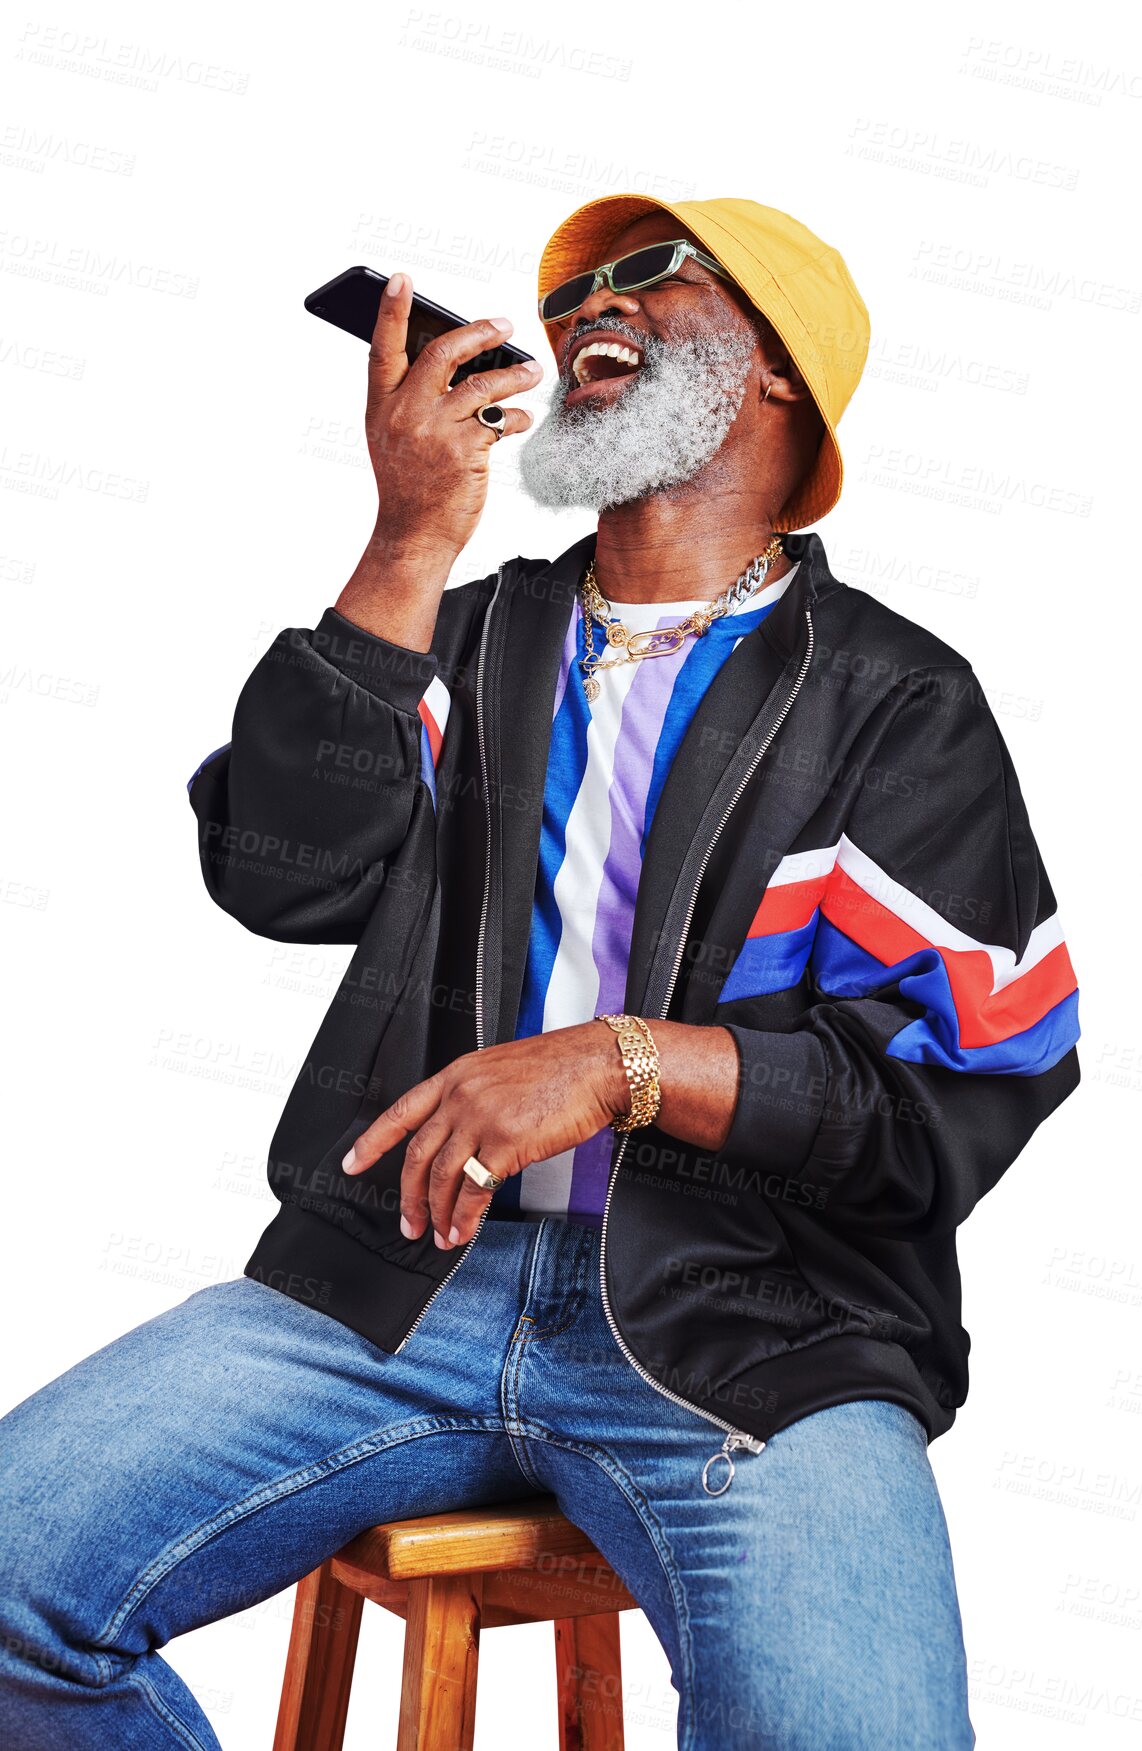 Buy stock photo Phone call, speaker and senior man with fashion, funny or communication isolated on transparent background. African person, mature model or guy with cellphone, conversation or png with stylish outfit